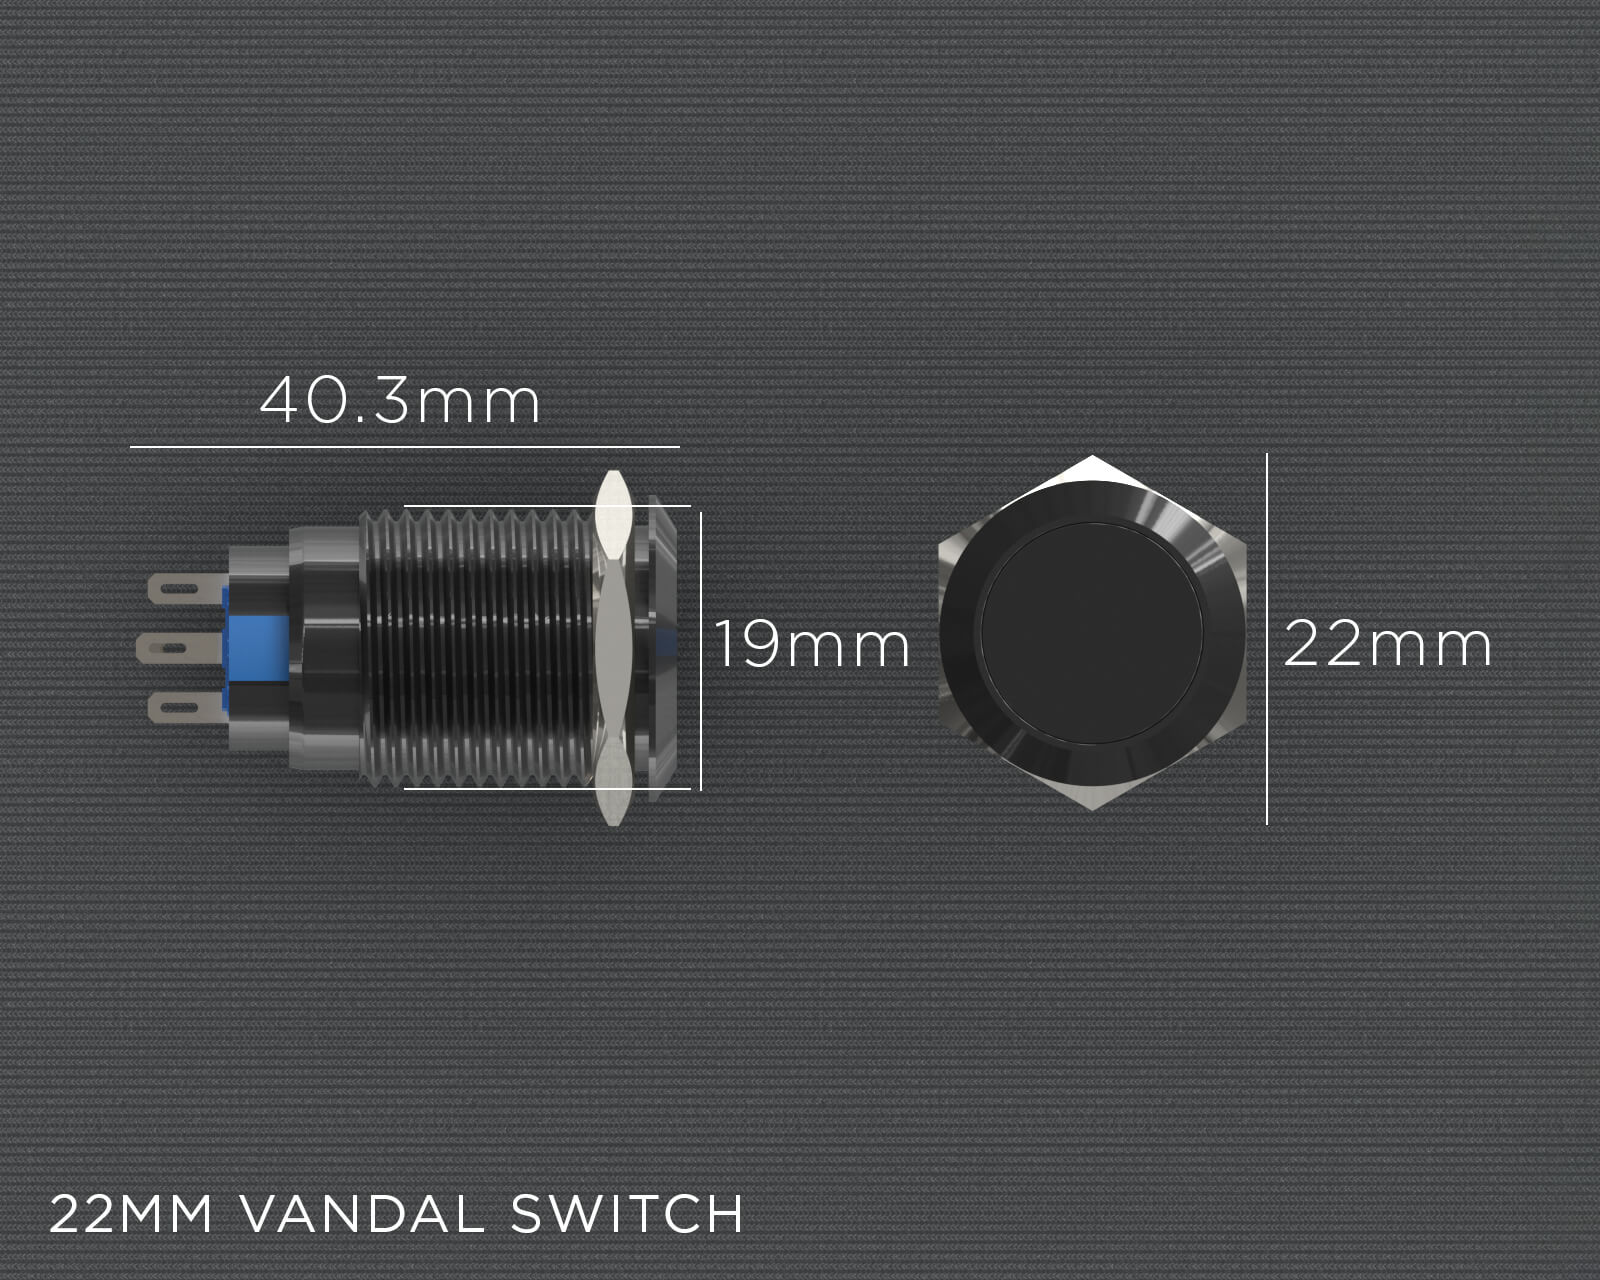 PrimoChill Black Aluminum Momentary Vandal Resistant Switch - 22mm - PrimoChill - KEEPING IT COOL